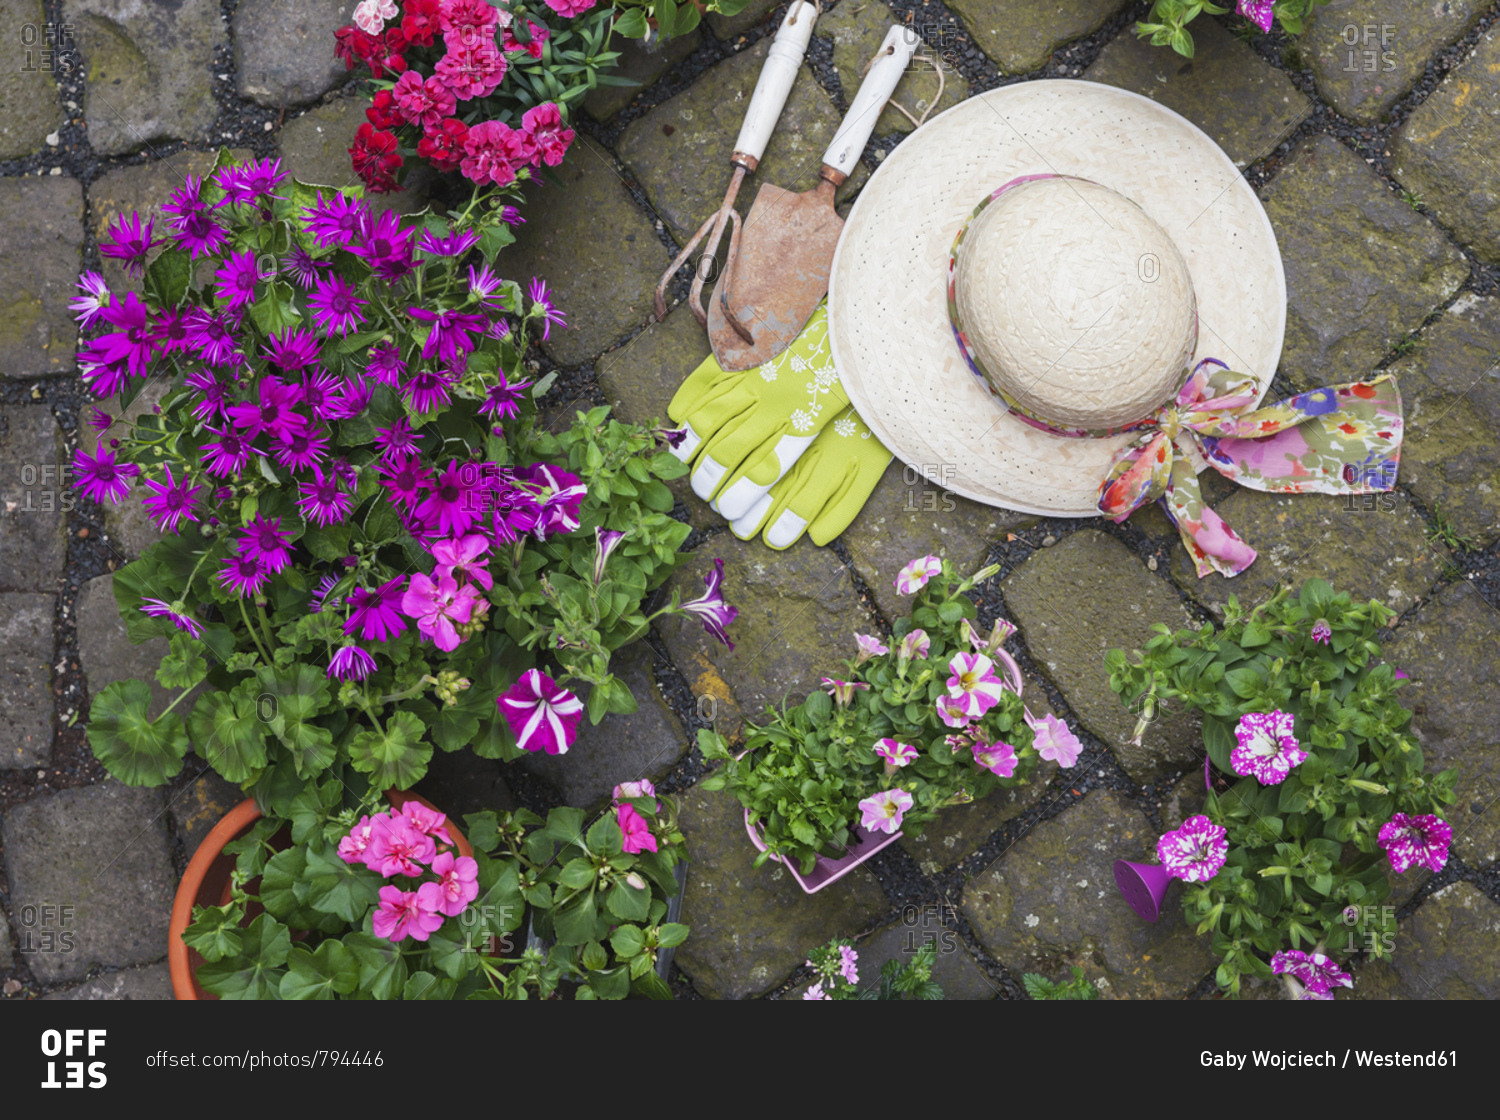 Various potted spring and summer flowers- straw hat- gardening tools and gloves on cabblestone pavement